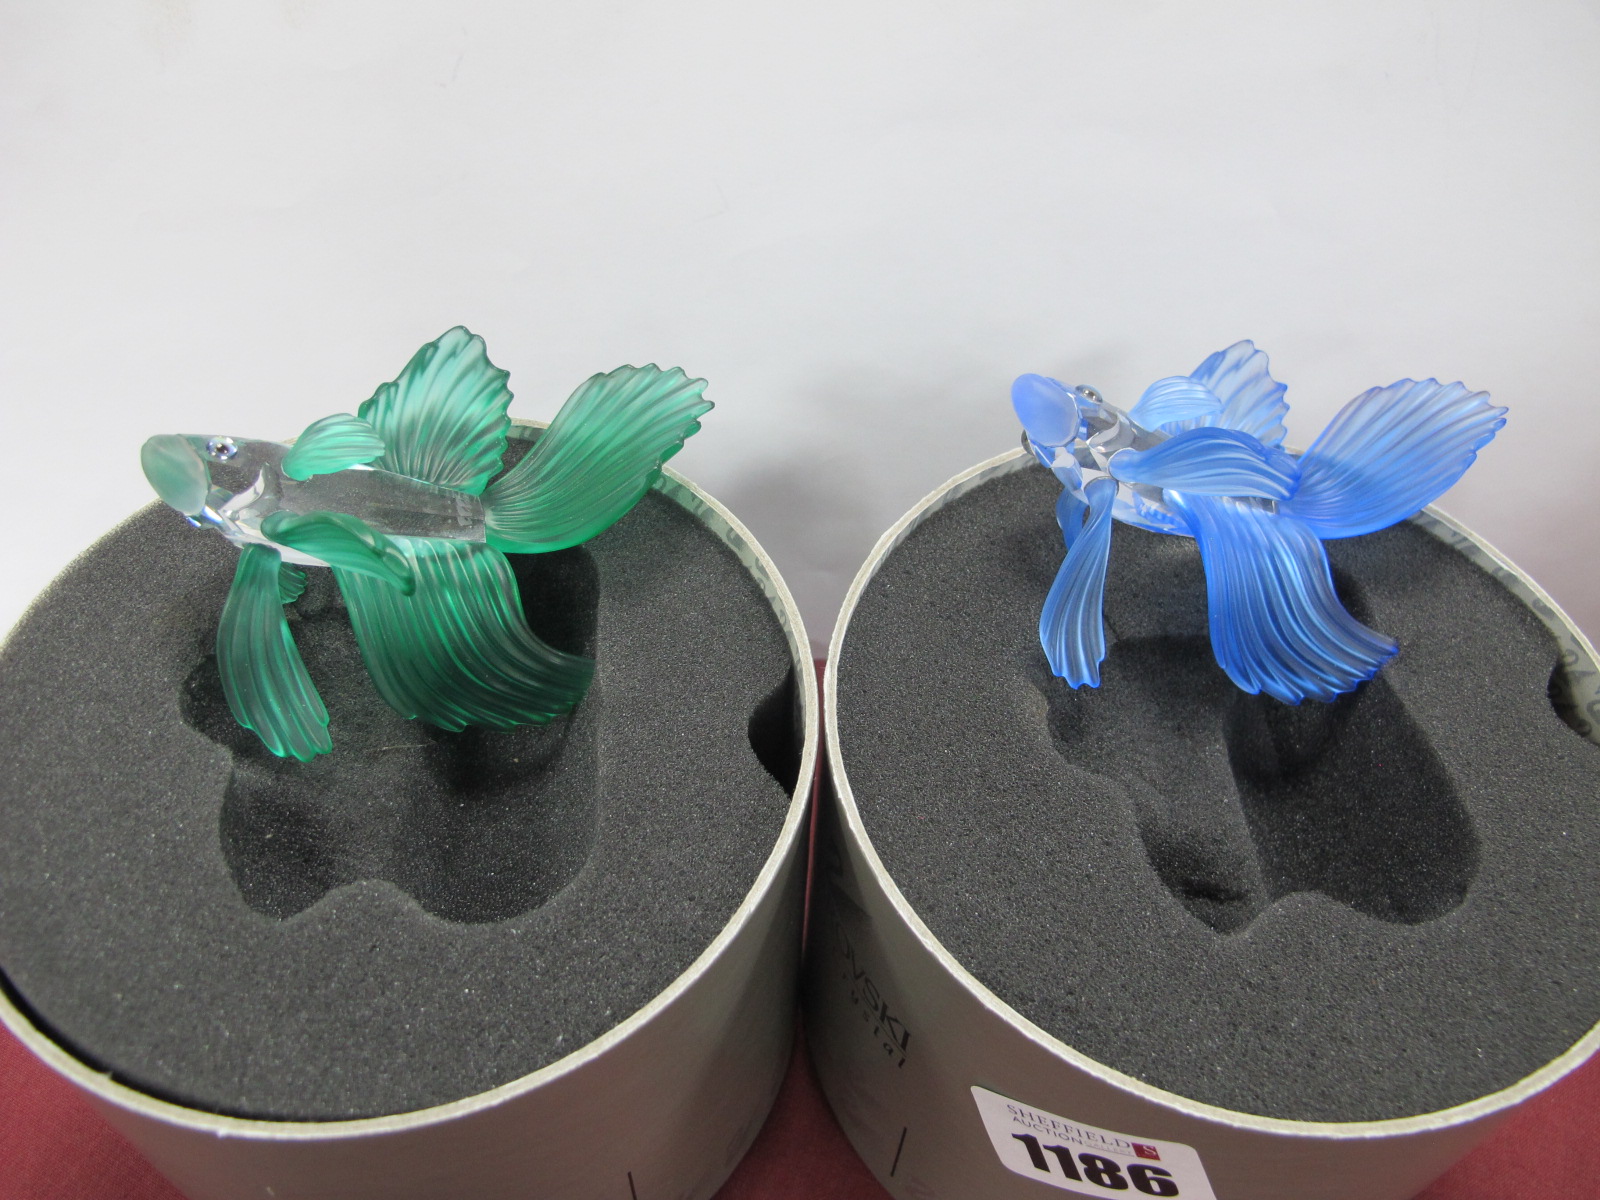 Swarovski Siamese Fighting Fish 7644 000 005, in blue 8.5cm long, (detached); and 006 in green both